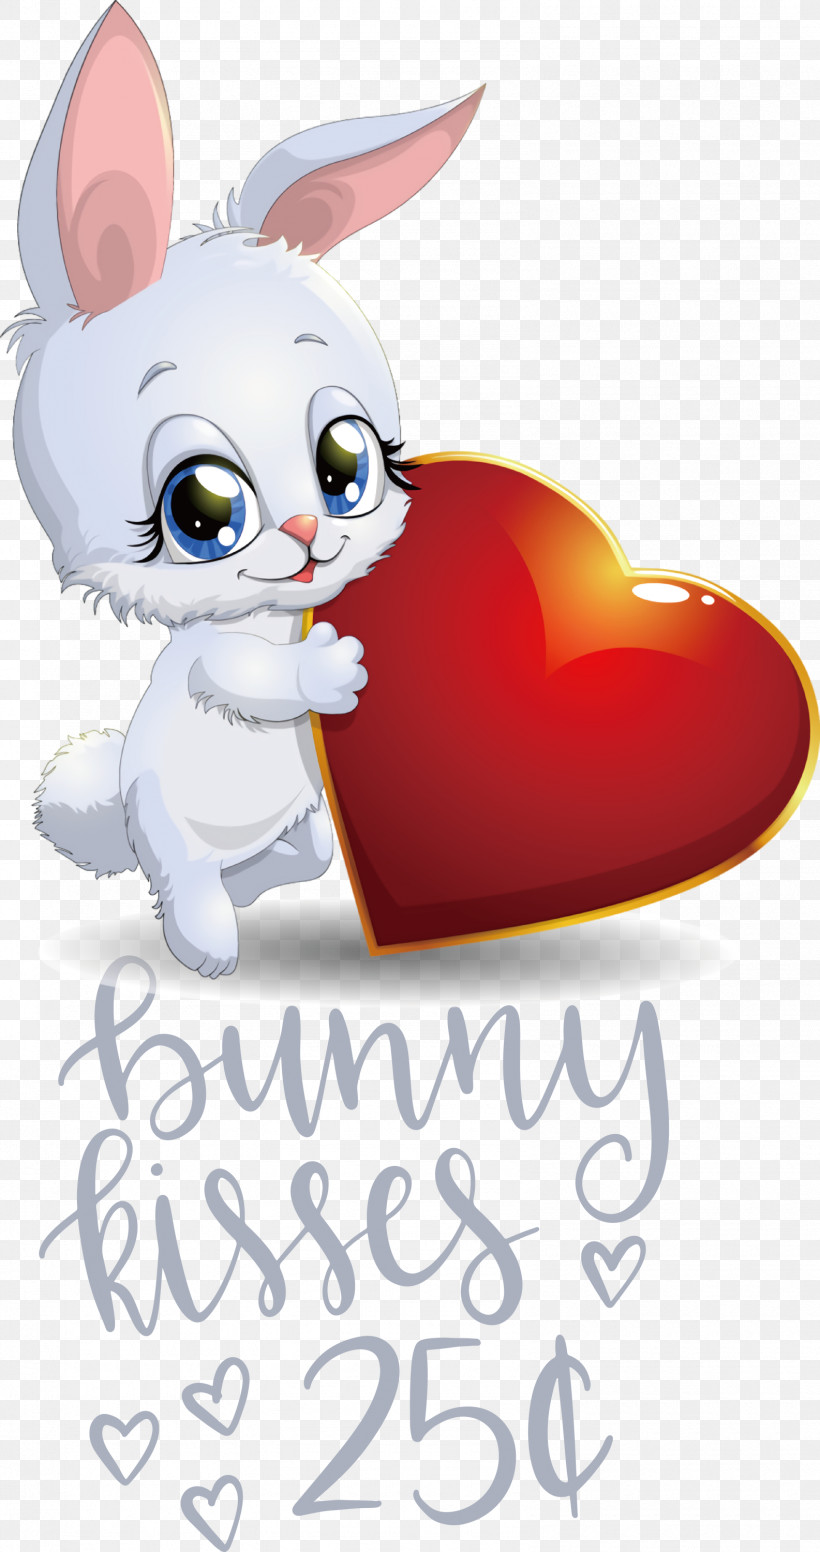 Bunny Kisses Easter Easter Day, PNG, 1585x3000px, Easter, Easter Bunny, Easter Day, Hare, My 1st Easter Download Free